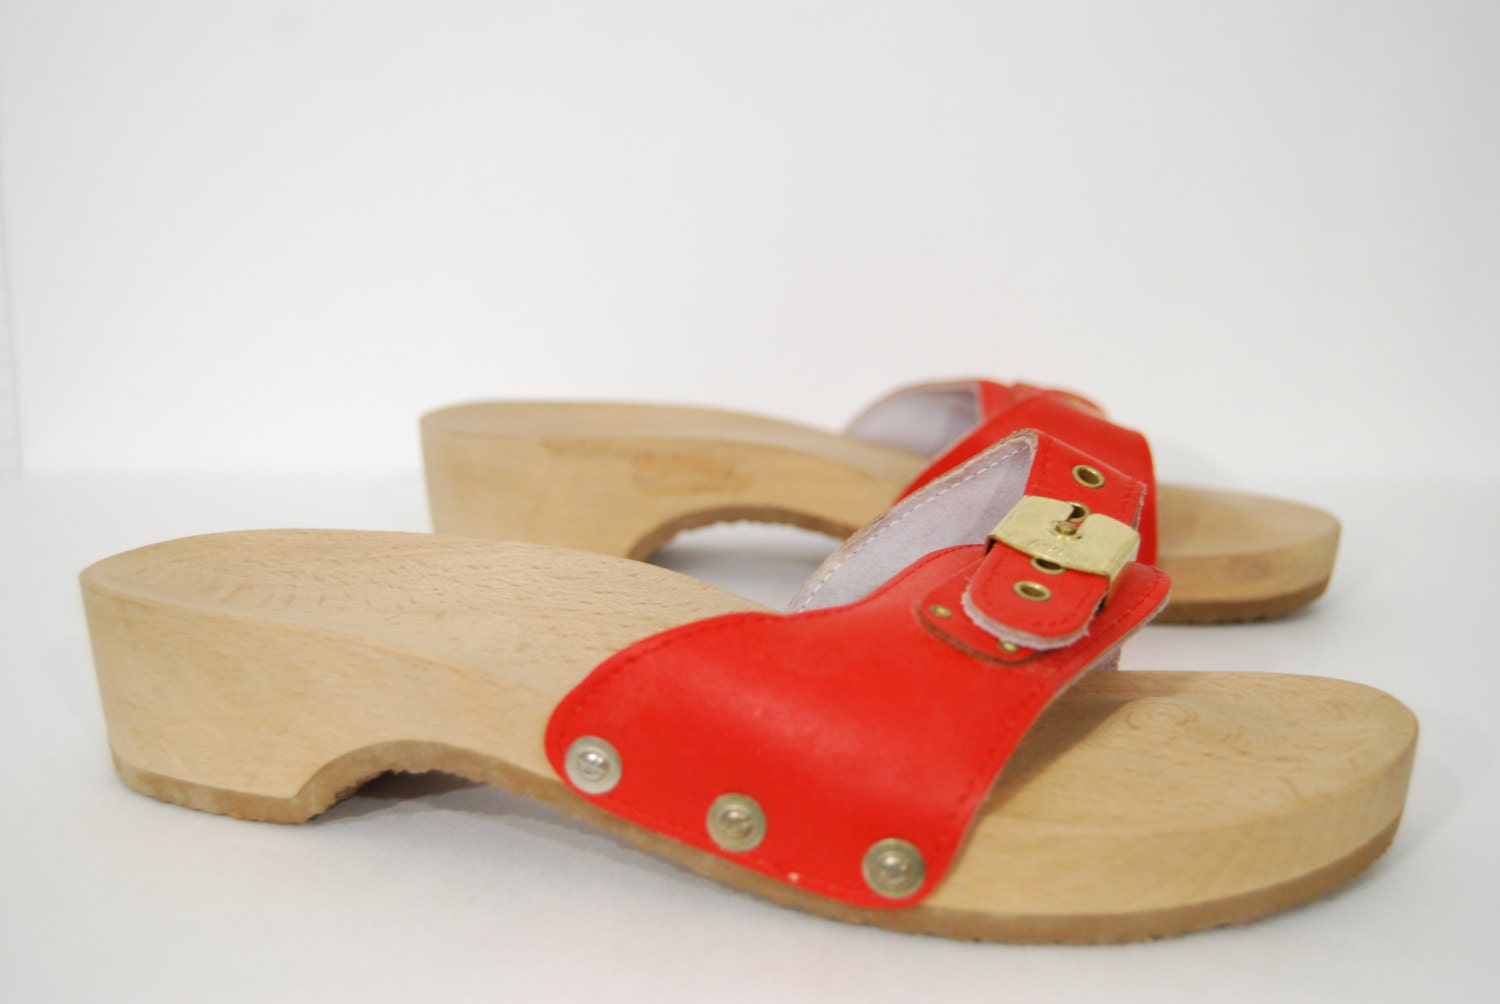 vintage 1970s / Scholl / red / sandals / clogs / wood / by YeYe